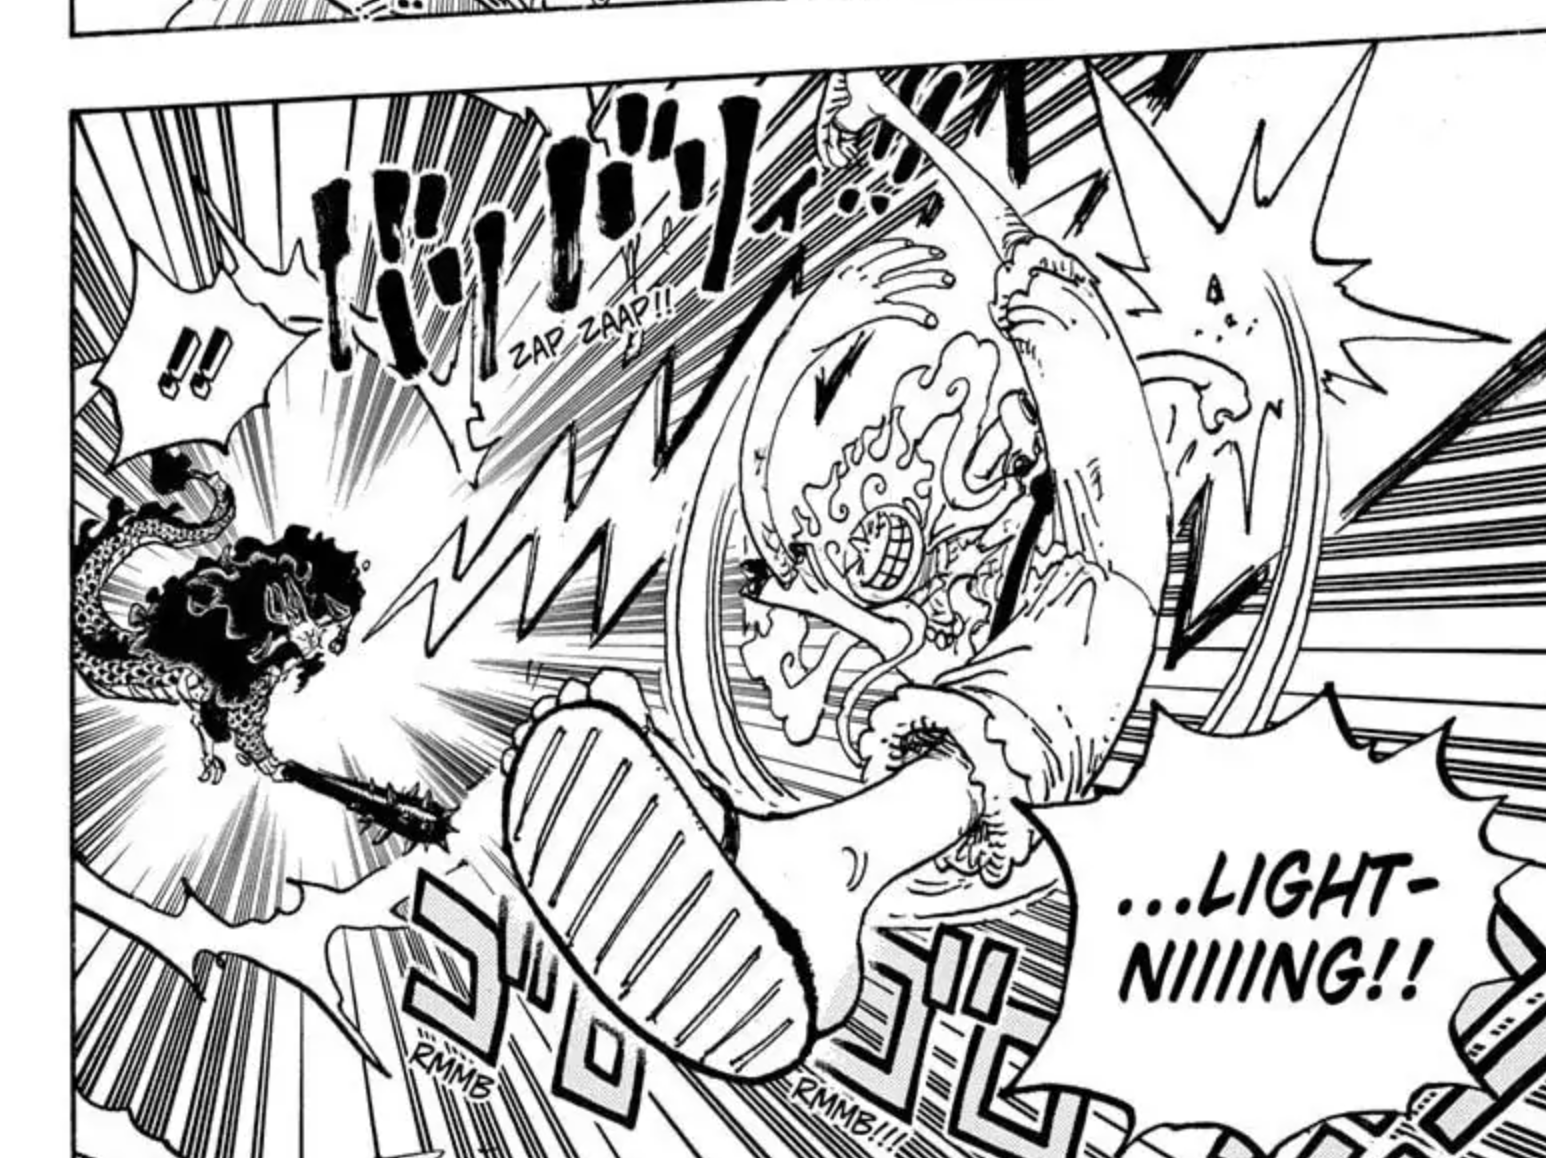 Luffy's evolution: Gear 5 unveiled amidst chaos in One Piece